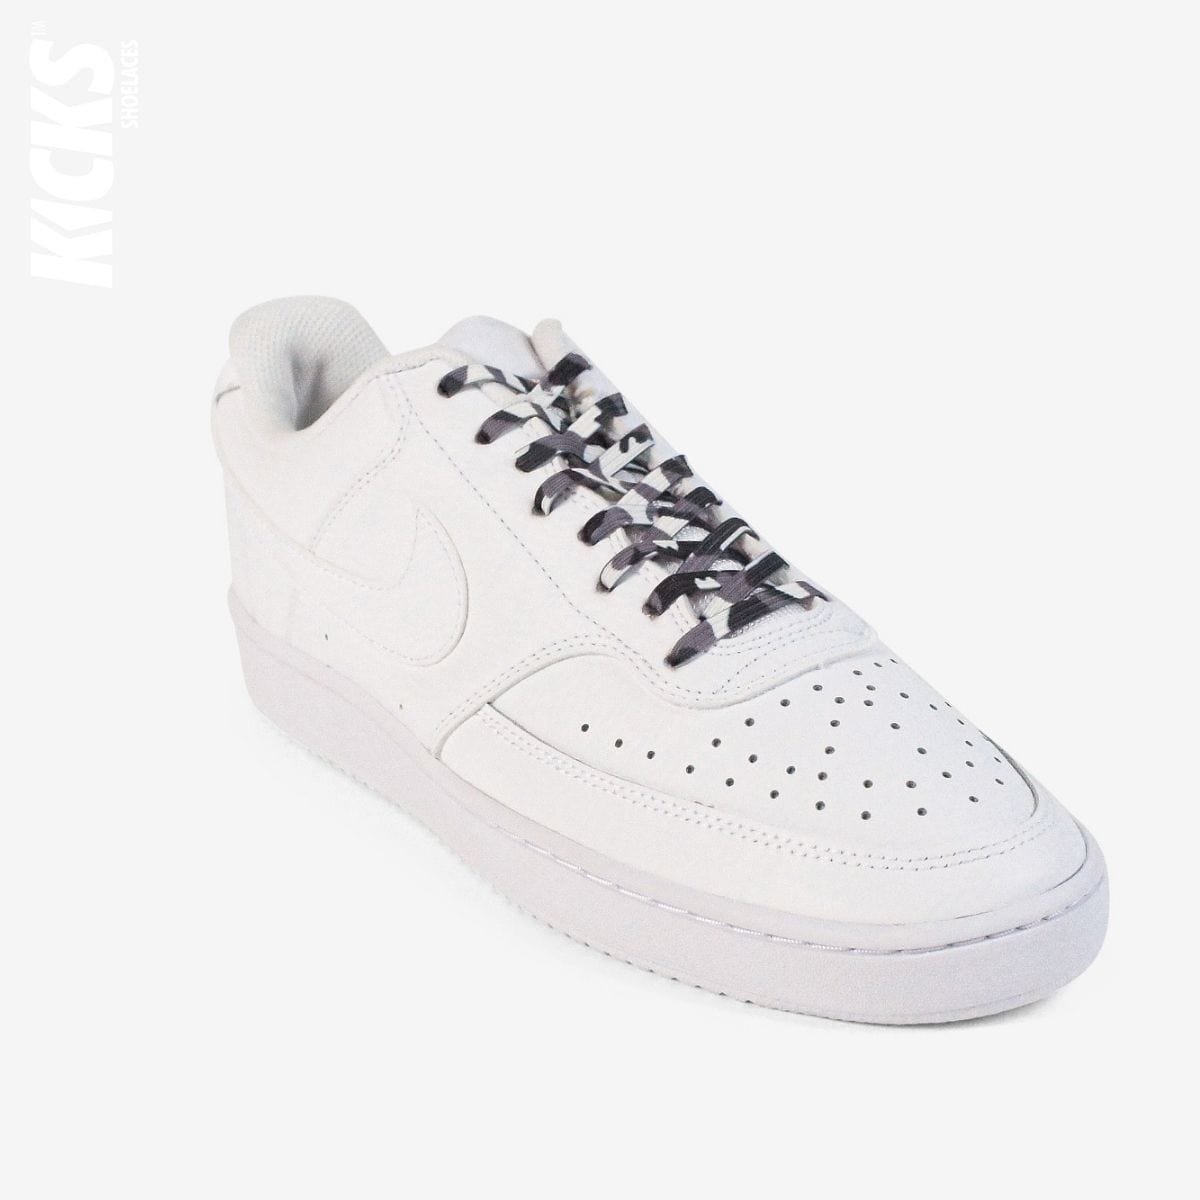 elastic-no-tie-shoelaces-with-black-camo-laces-on-nike-white-sneakers